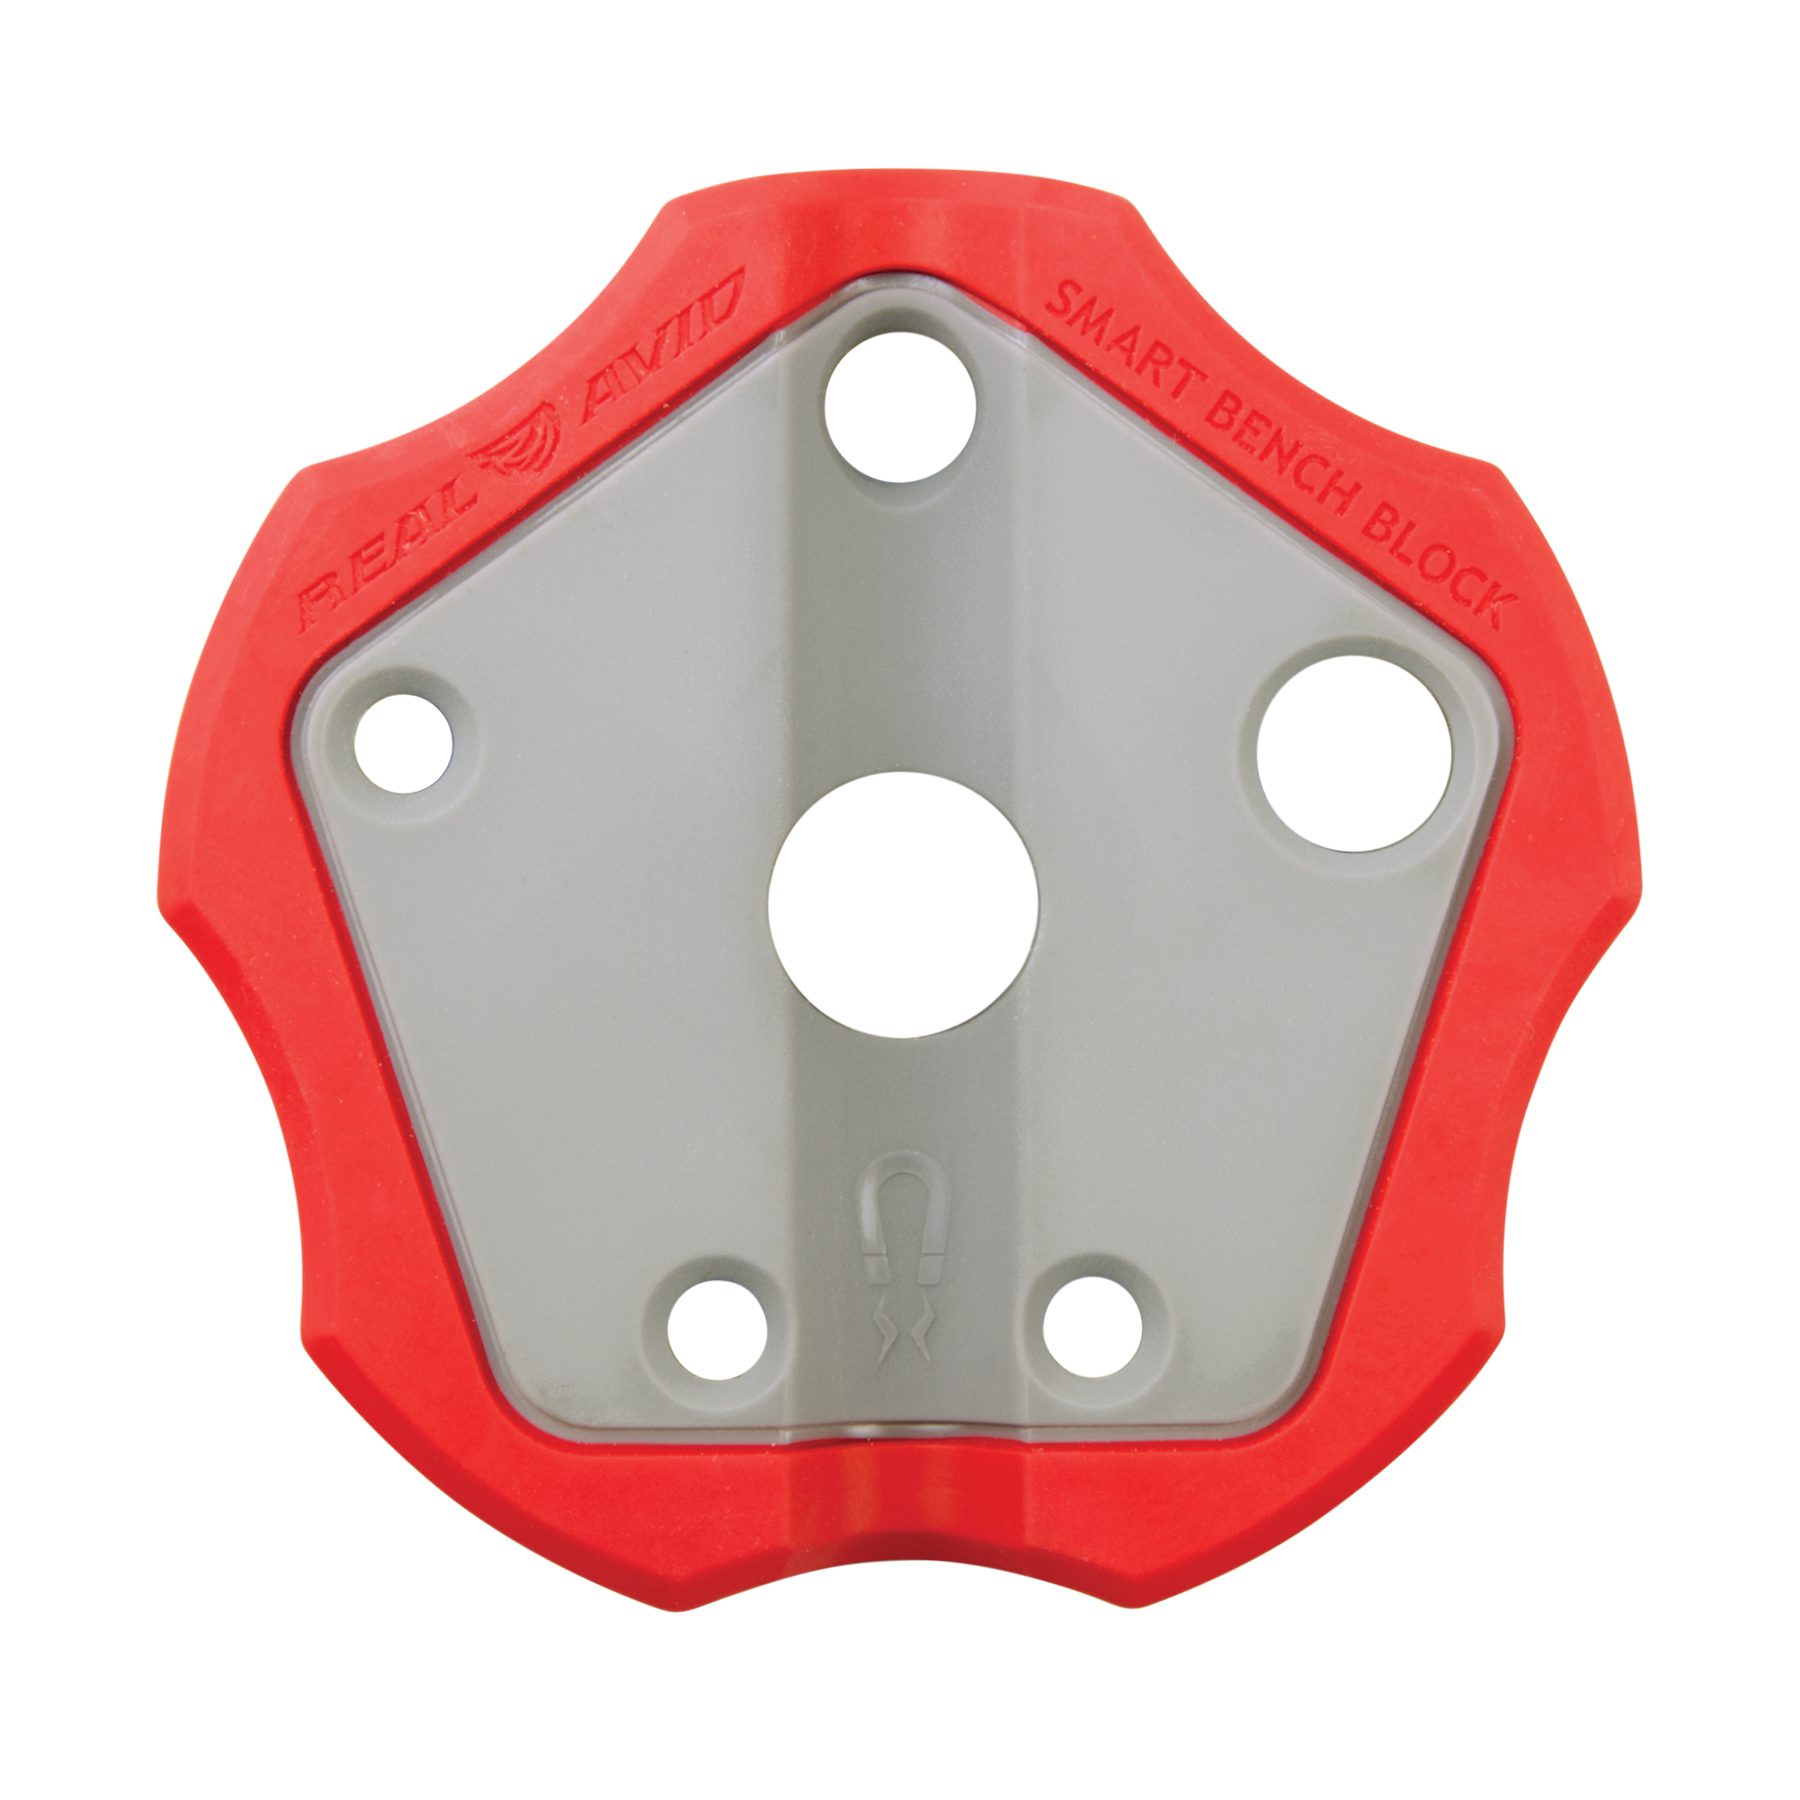 a red and gray tool holder with holes